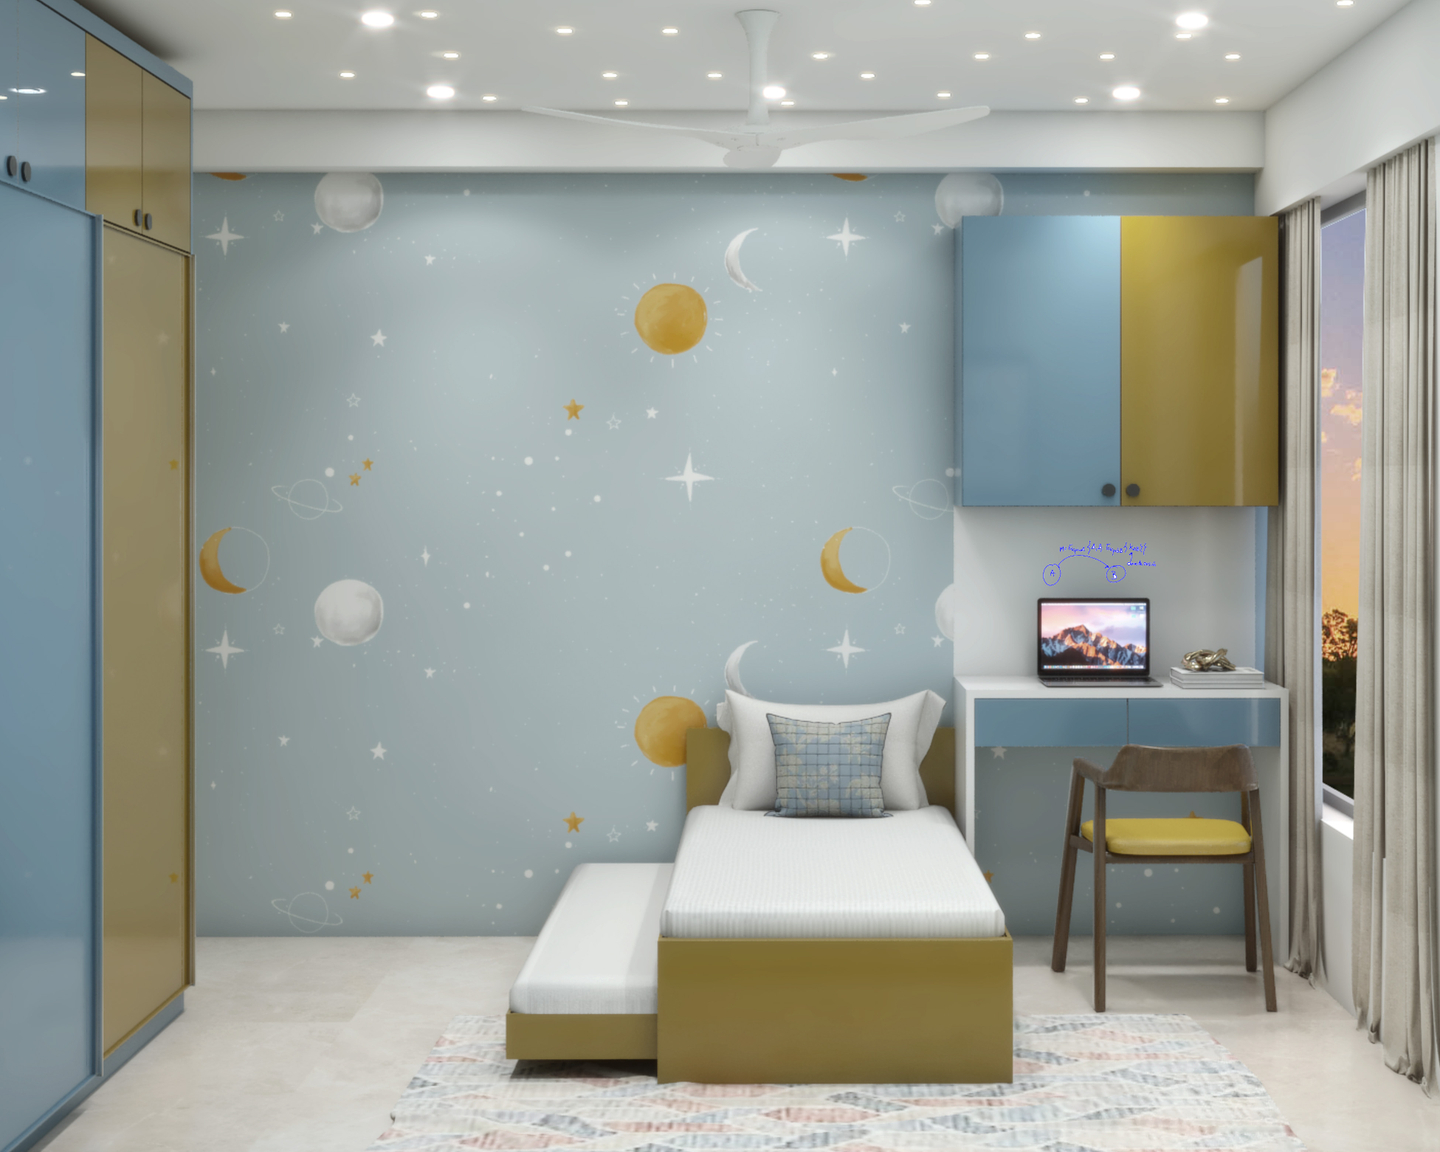 Kid's Room With Space-Themed Wallpaper - Livspace